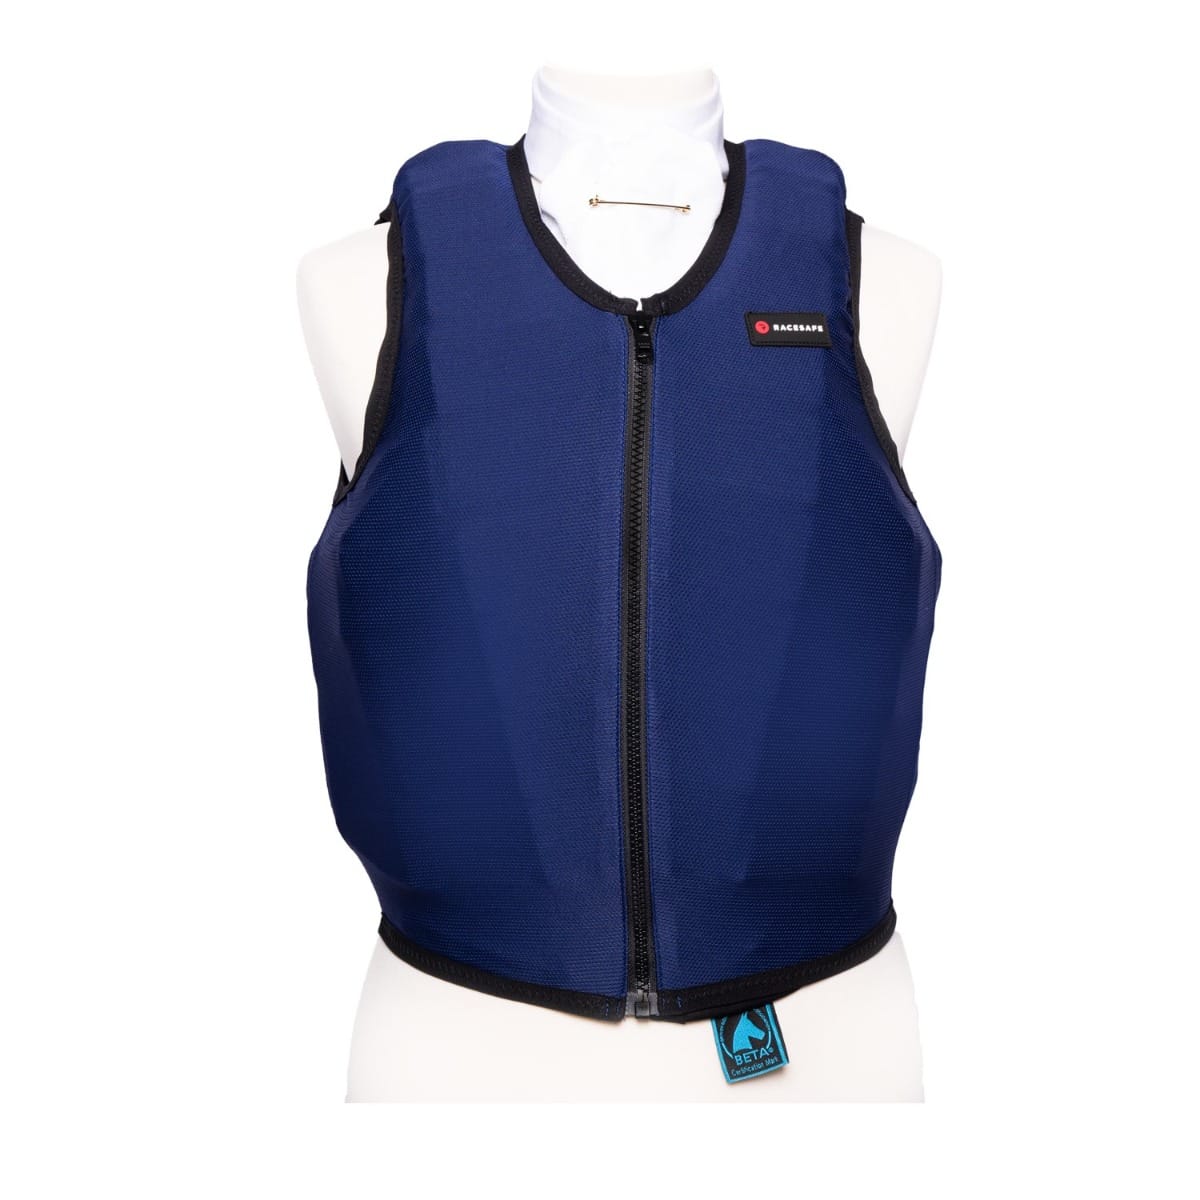 Racesafe Childs Body Protector Cover